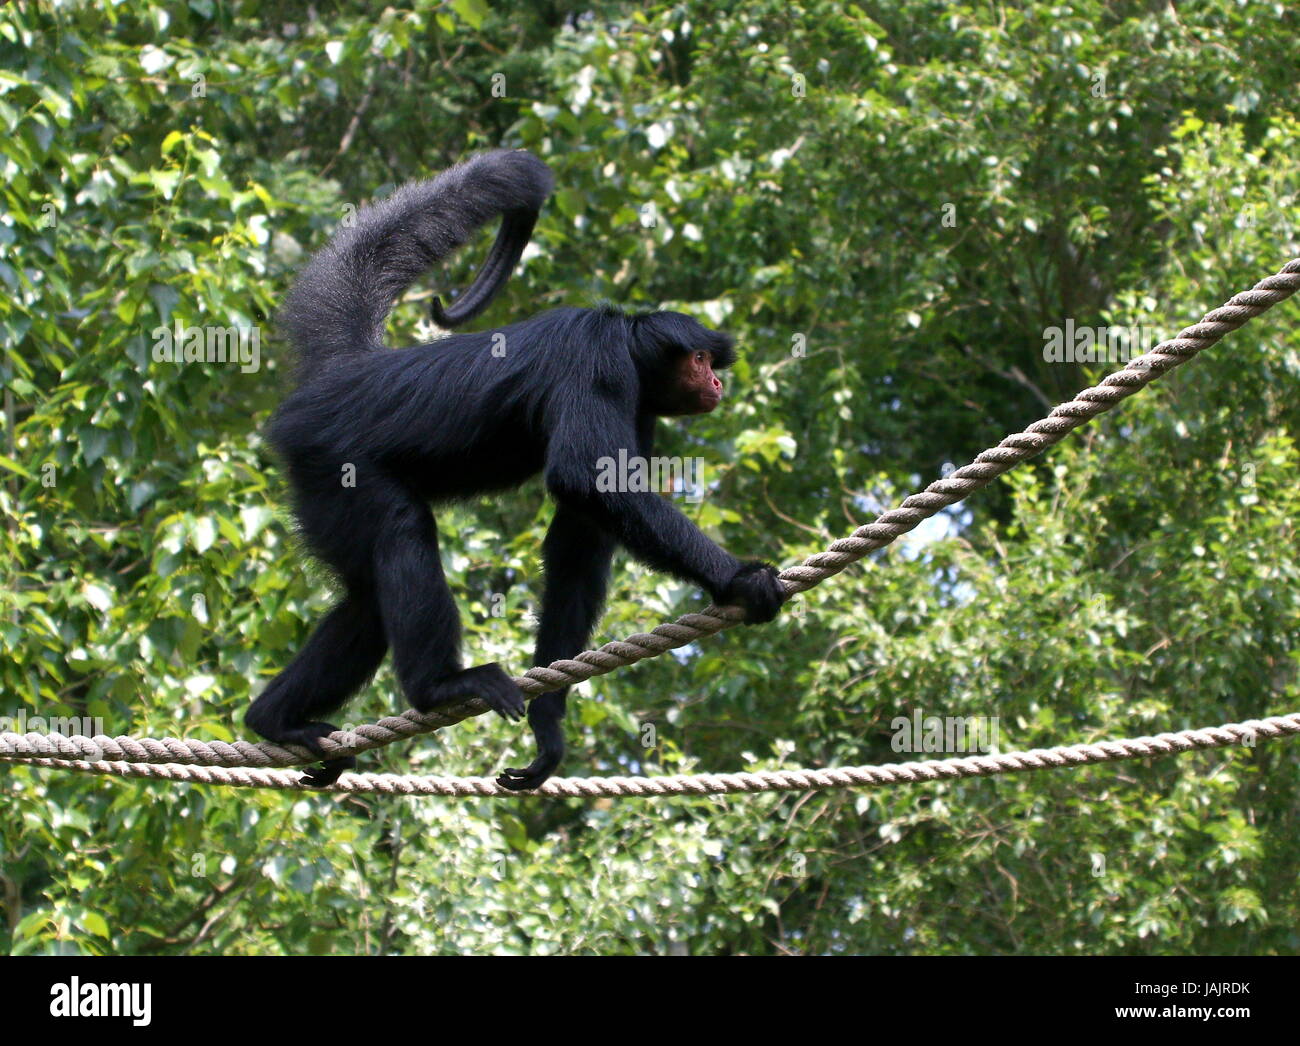 Tightrope walking South American Red-Faced Black Spider Monkey (Ateles paniscus) a.k.a. Guiana spider monkey (at Gaia Zoo, Kerkrade, The Netherlands). Stock Photo